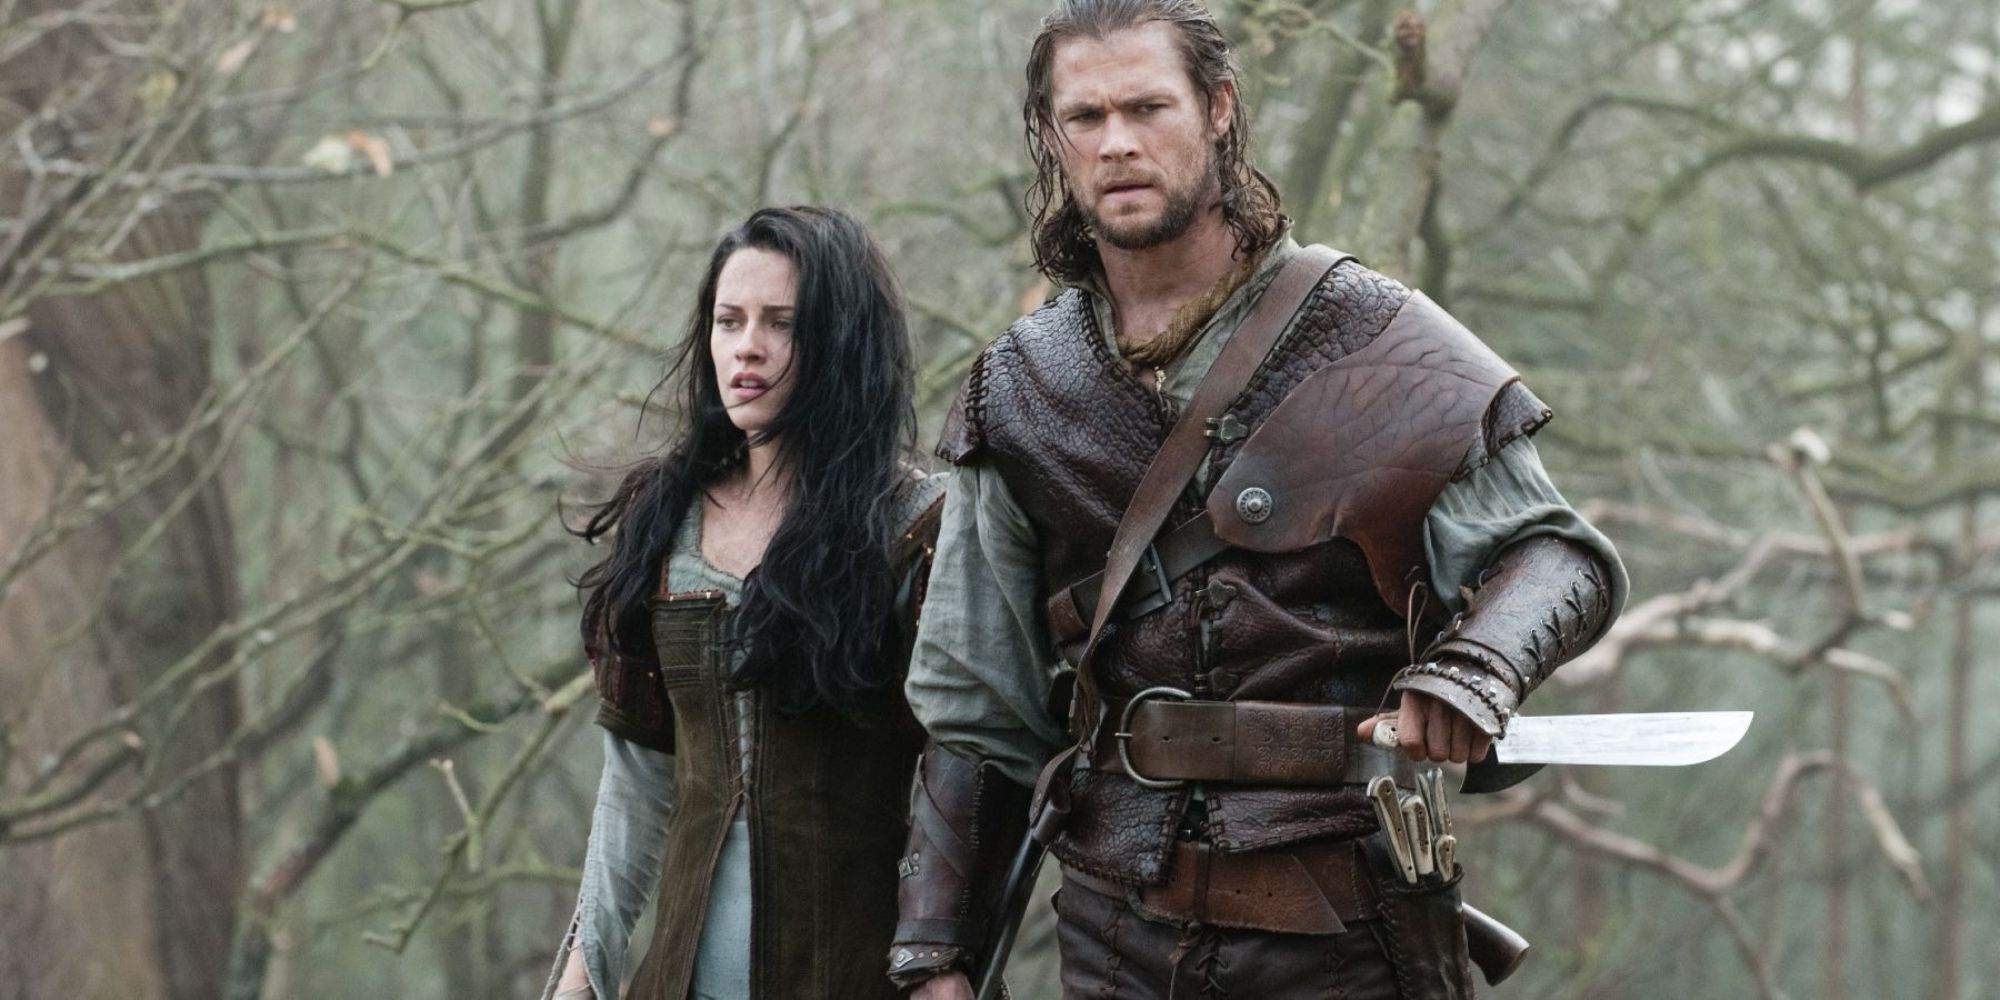 Snow White And Eric The Huntsman